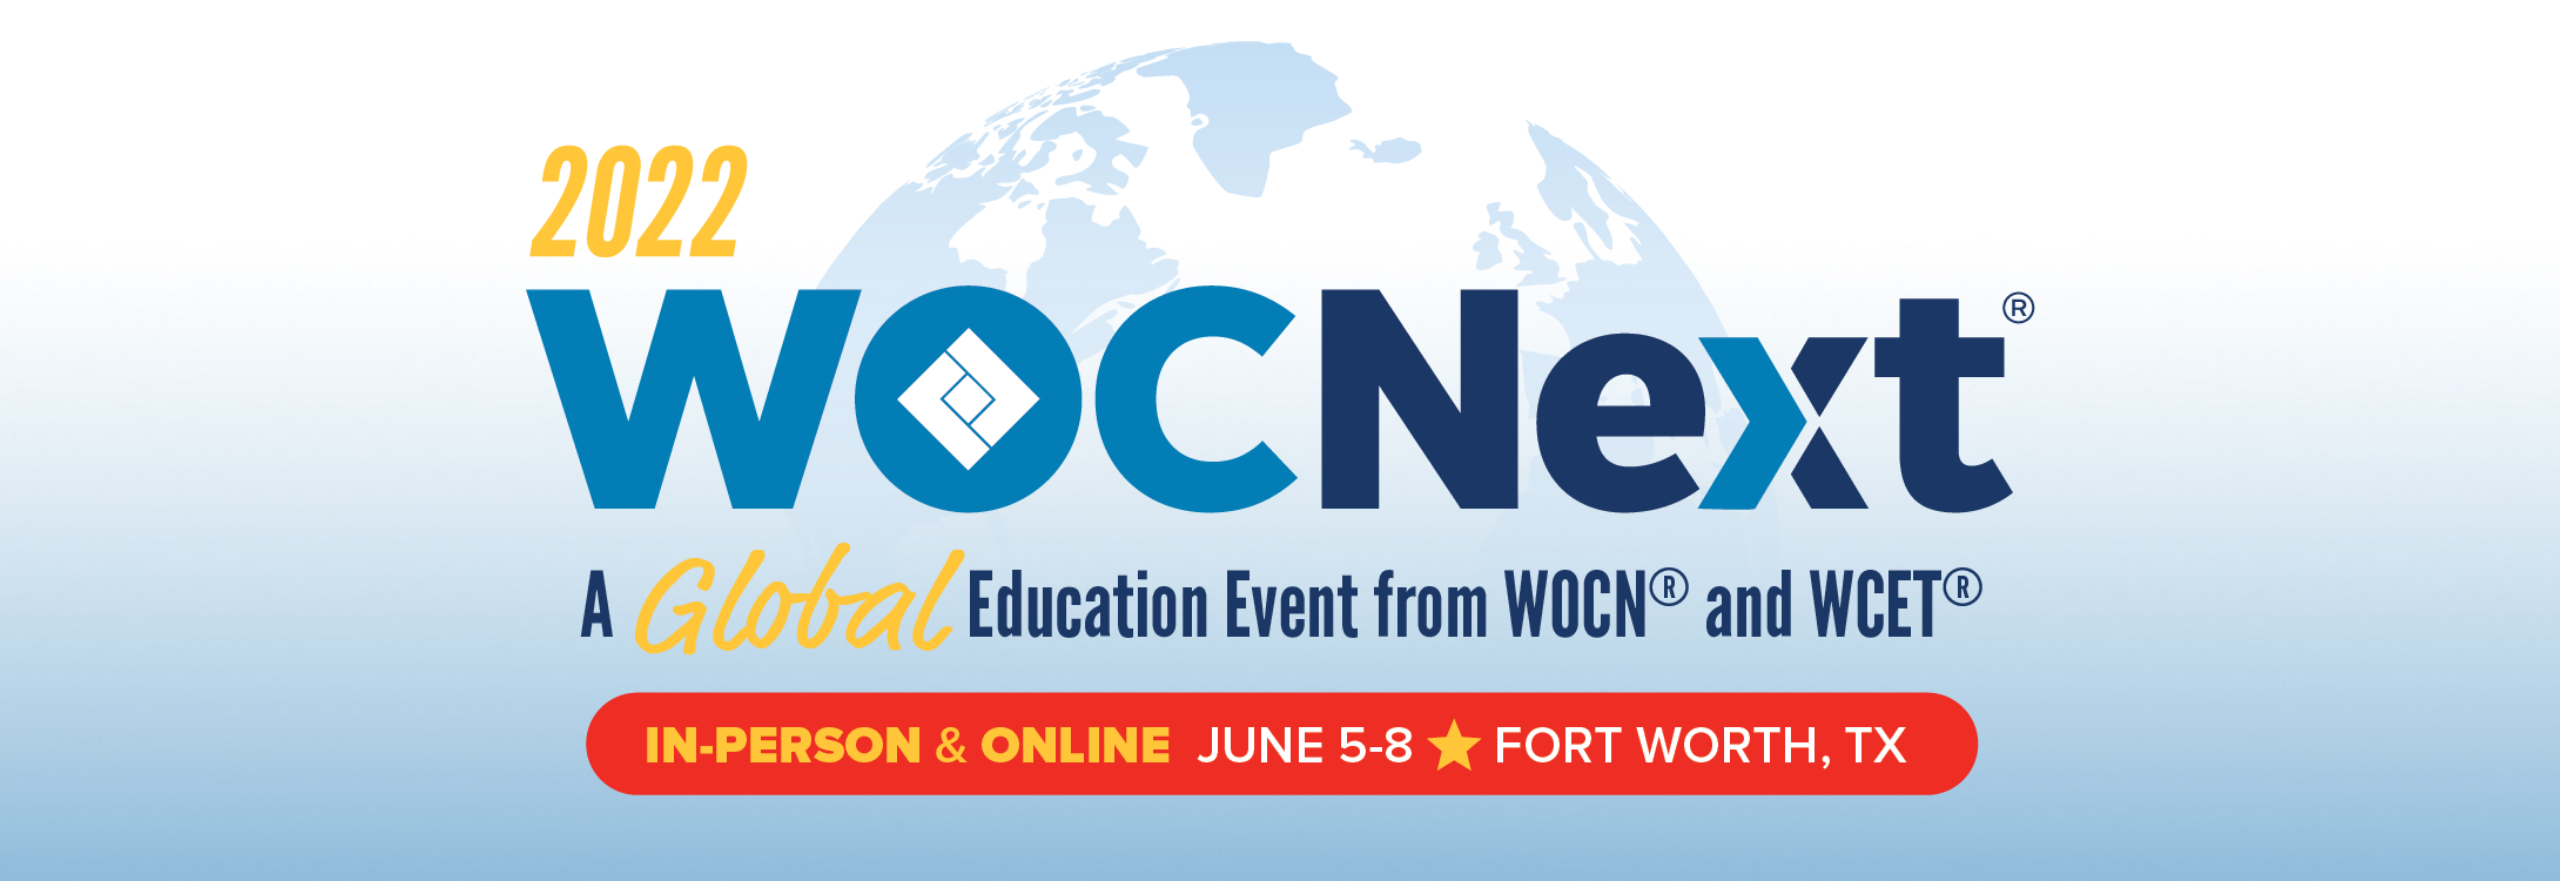 WOCNext 2022 Conference Abstract Insights WOCN